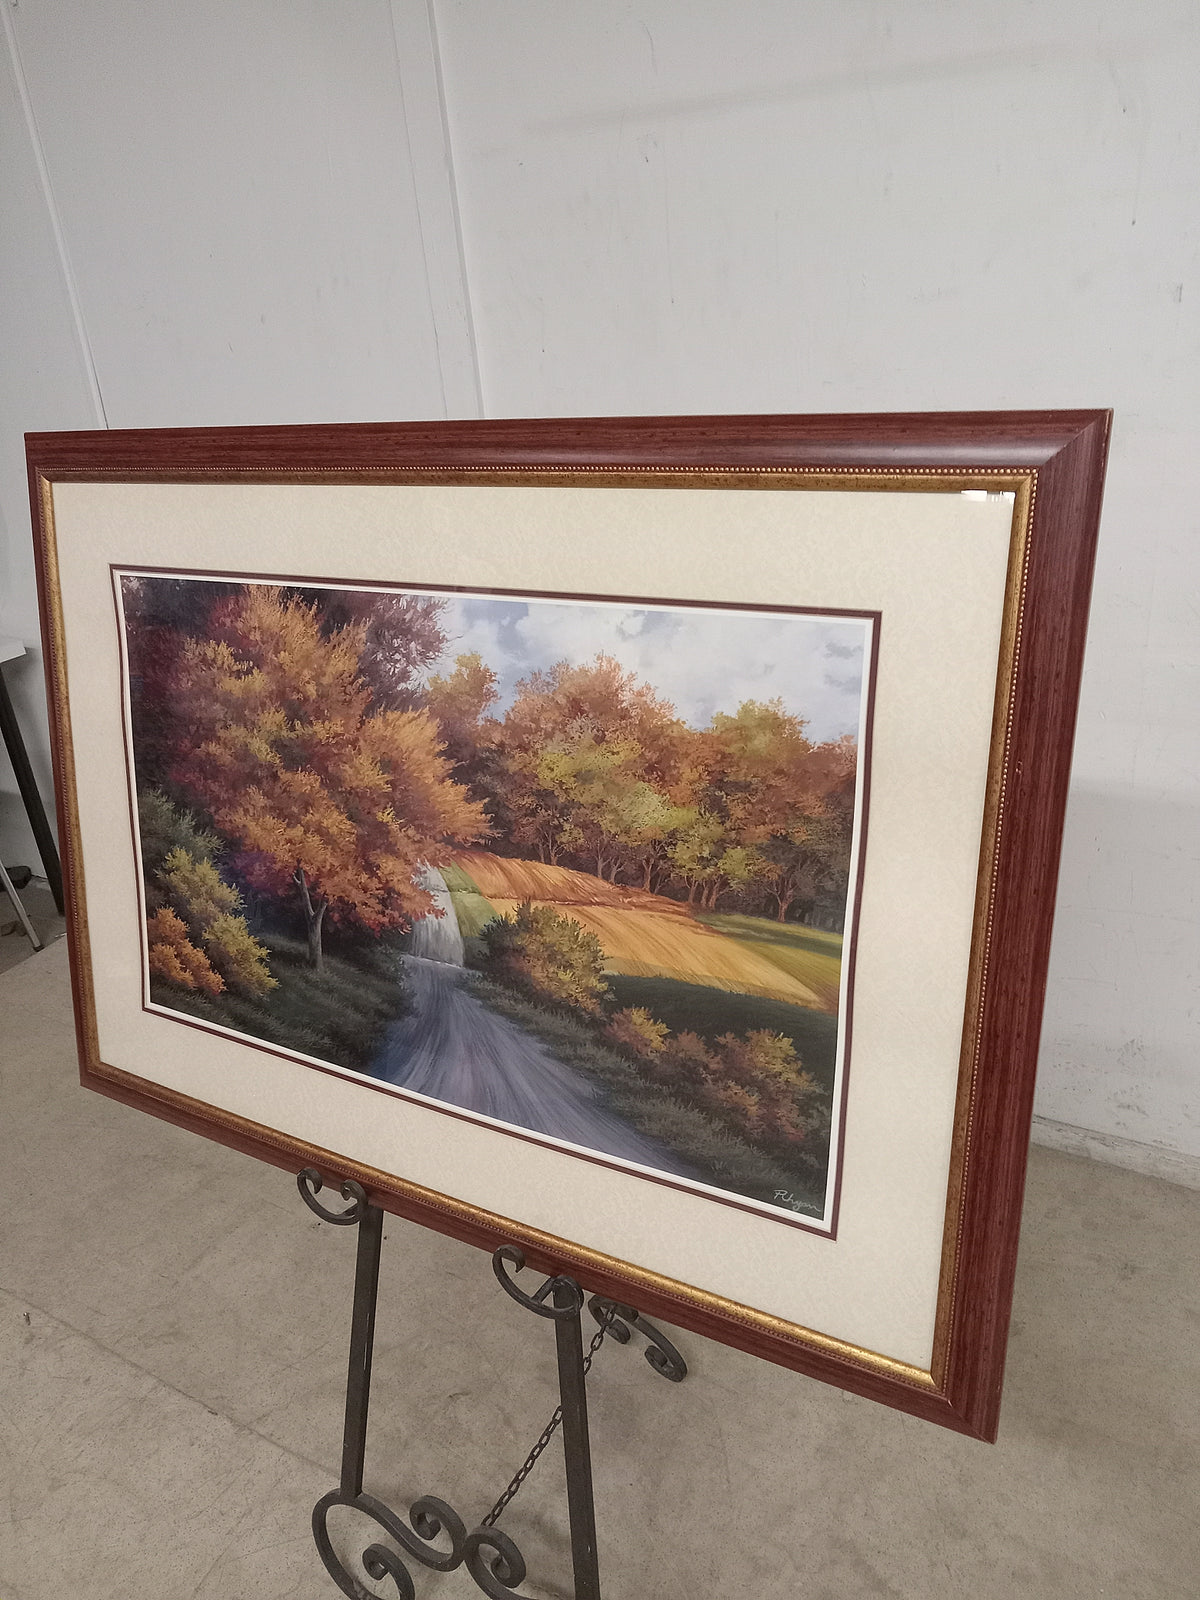 43.75" x 30.75" Autumn Countryside Road Wall Art